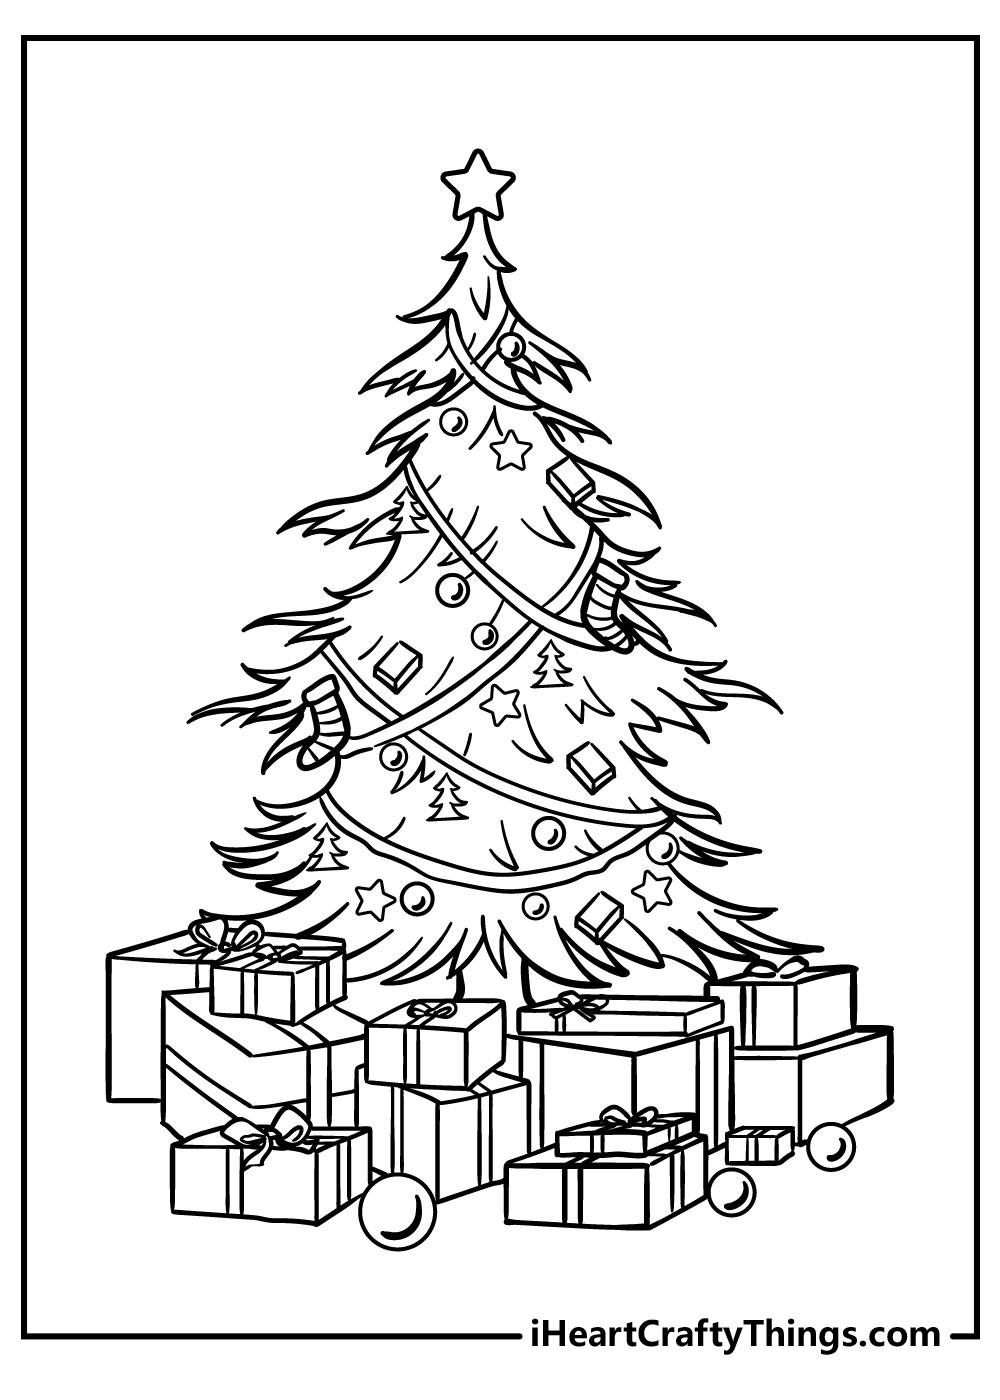 Christmas Tree Coloring Pages Updated 2021 